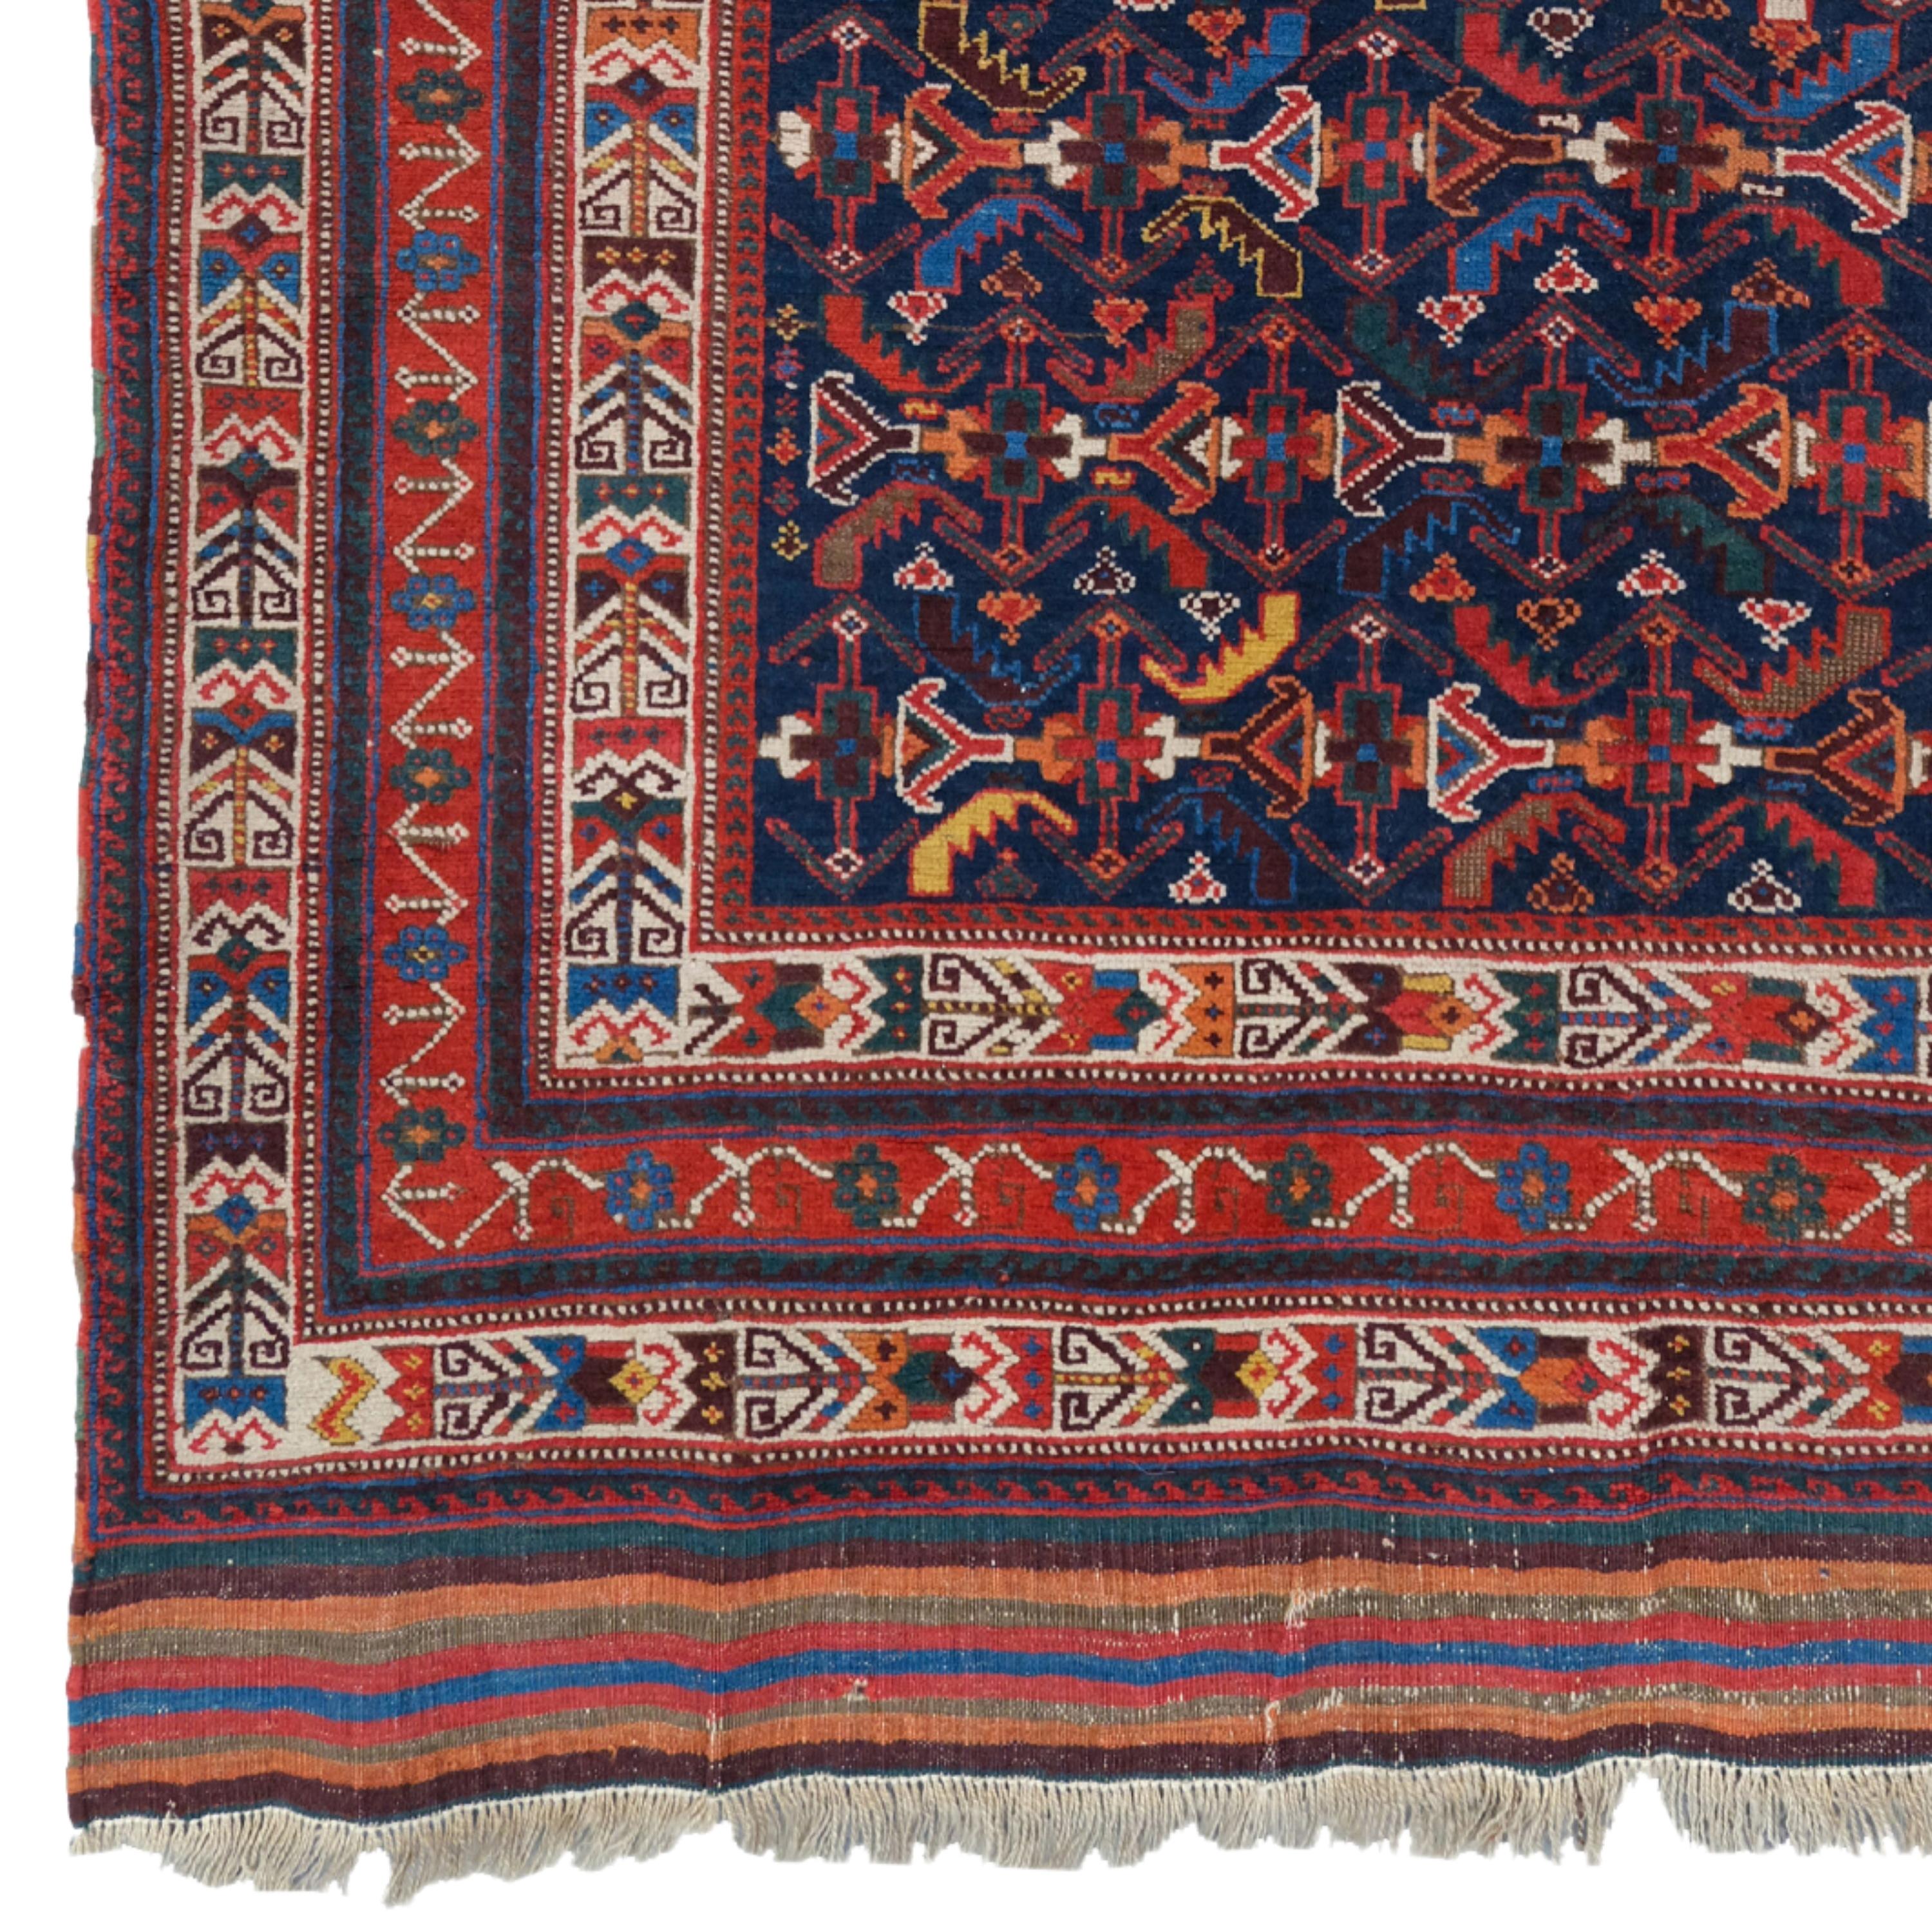 Antique Afshar Rug  Antique Rug

An good tribal Afshar rug with a repeat herati (leaf) design on a dark indigo blue ground. The herati design is drawn in bands across the rug which is quite an unusual feature. Note the long kilim ends with a banded